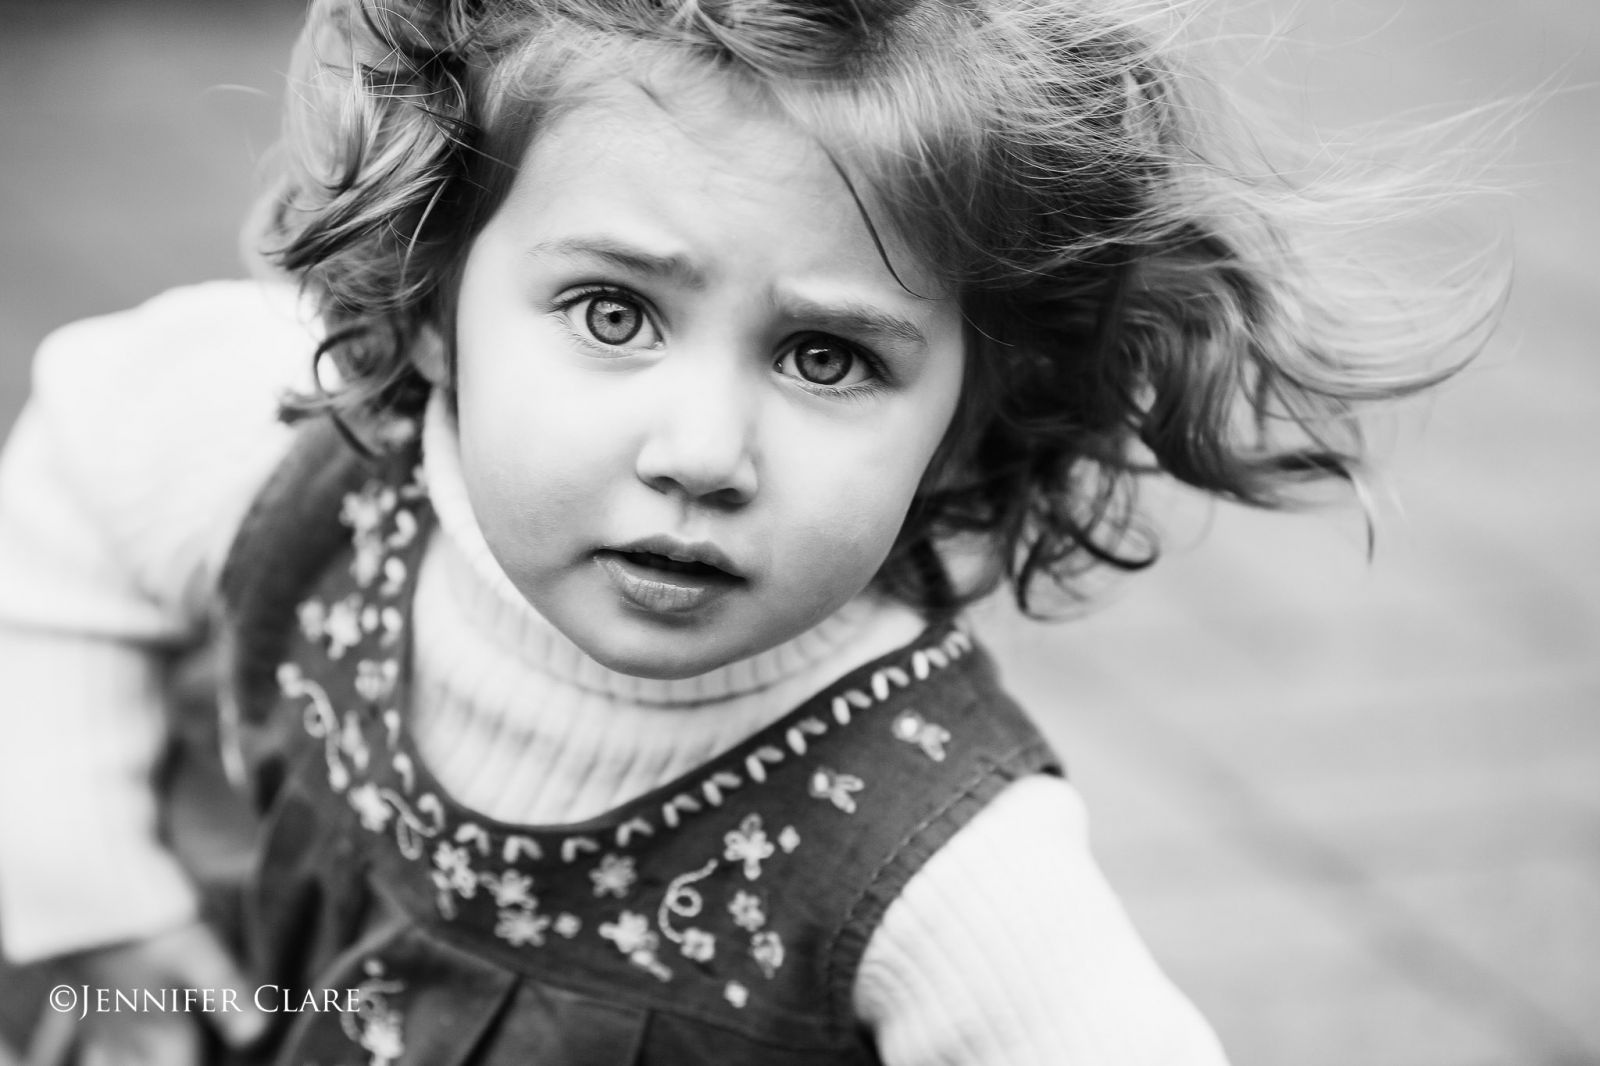 a black and white image of a small girl with a quizzical expression.